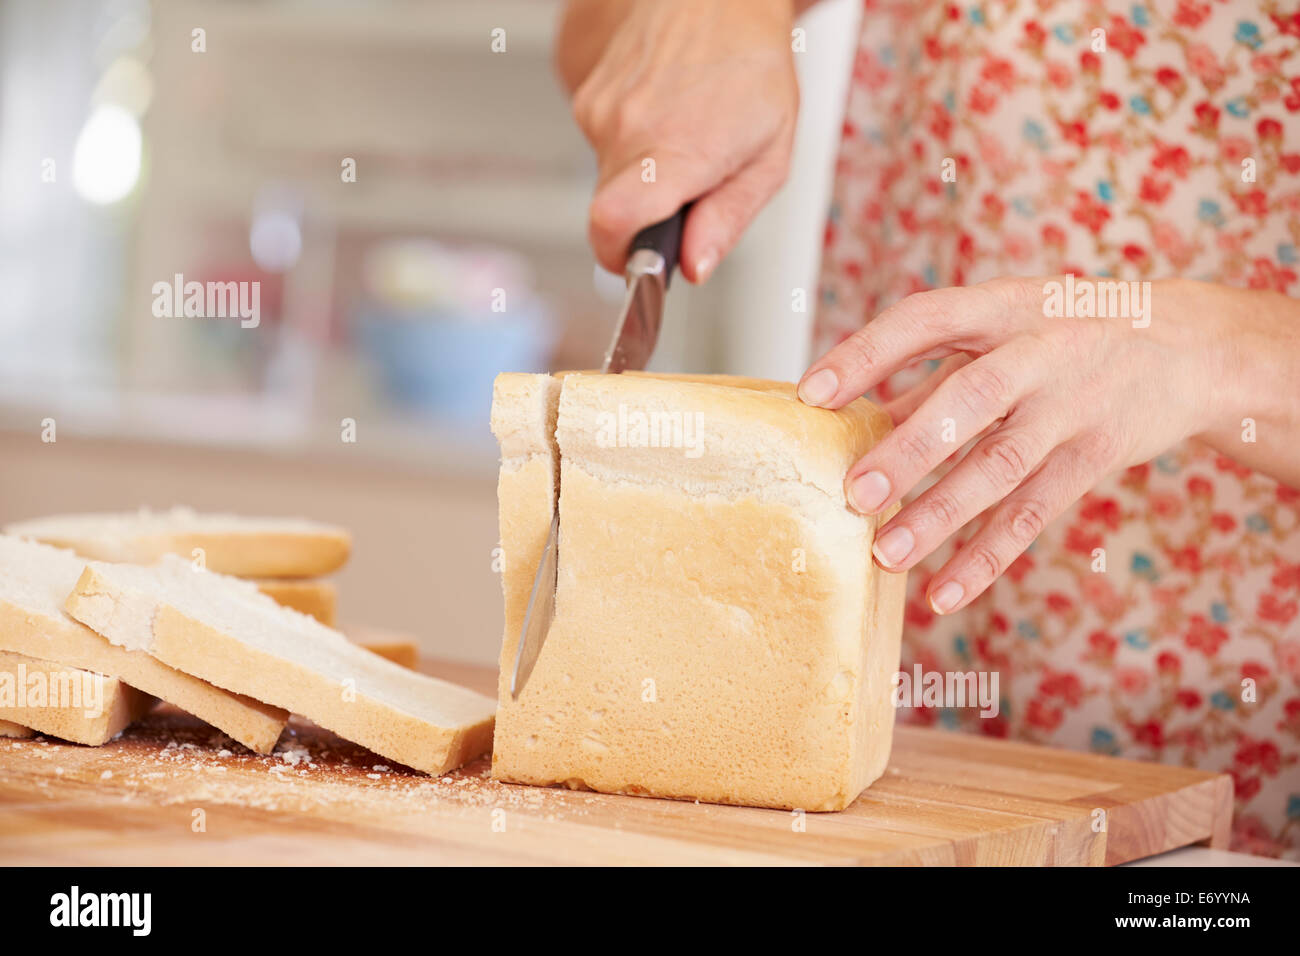 Close Up Of Woman Slicing Loaf Of Bread In Kitchen Stock Photo